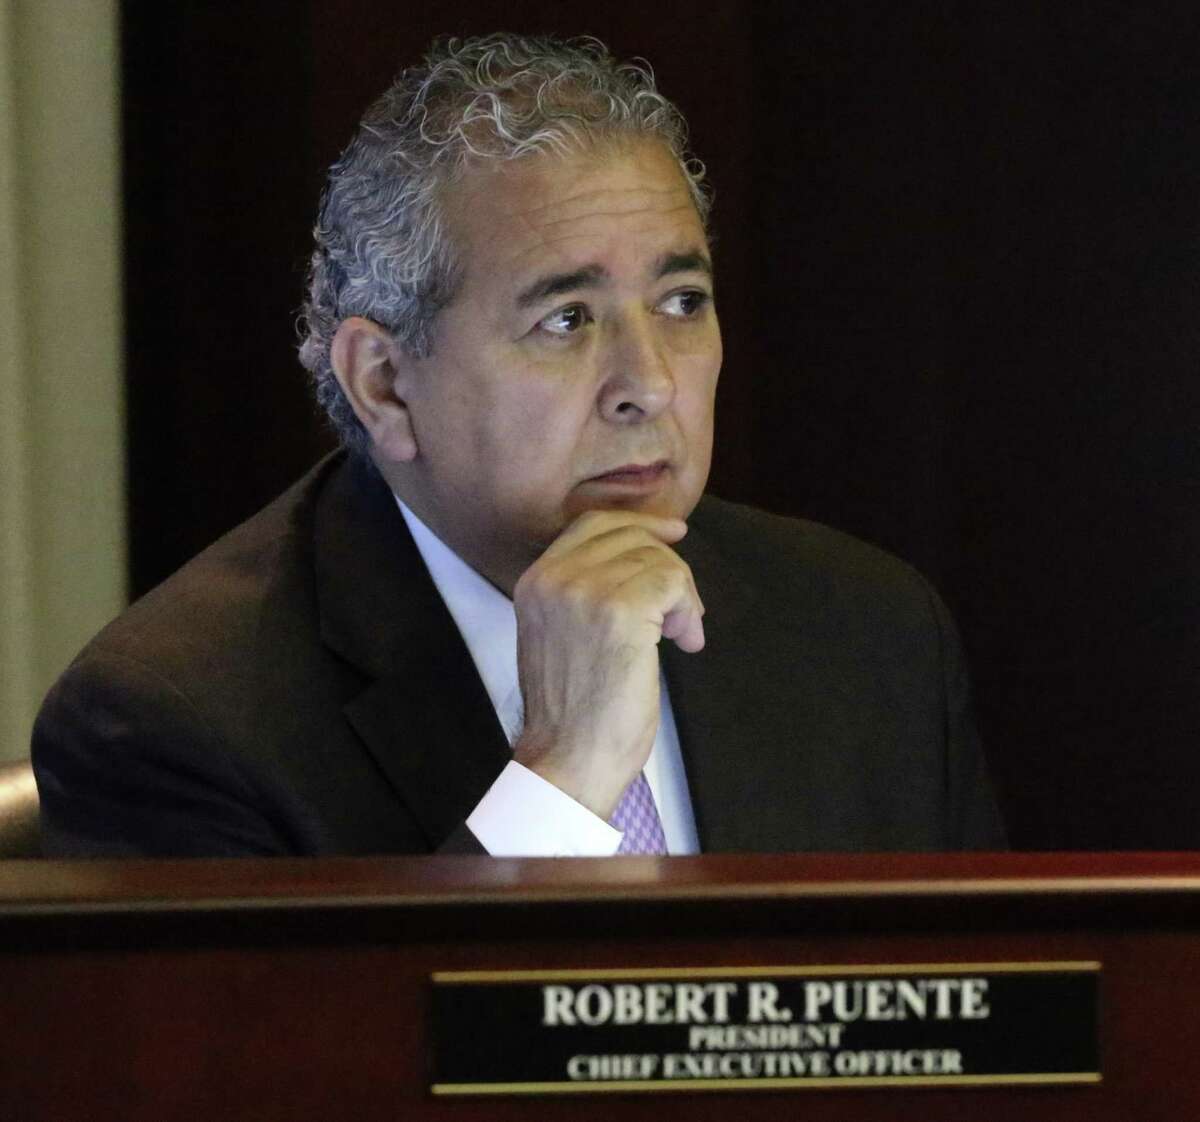 This is San Antonio Water System President and CEO Robert R. Puente Tuesday April 5, 2016 at San Antonio Water System during a Board of Trustees meeting regarding Garney Construction's plan to buy 80 percent of Abengoa's stake in the Vista Ridge pipeline.